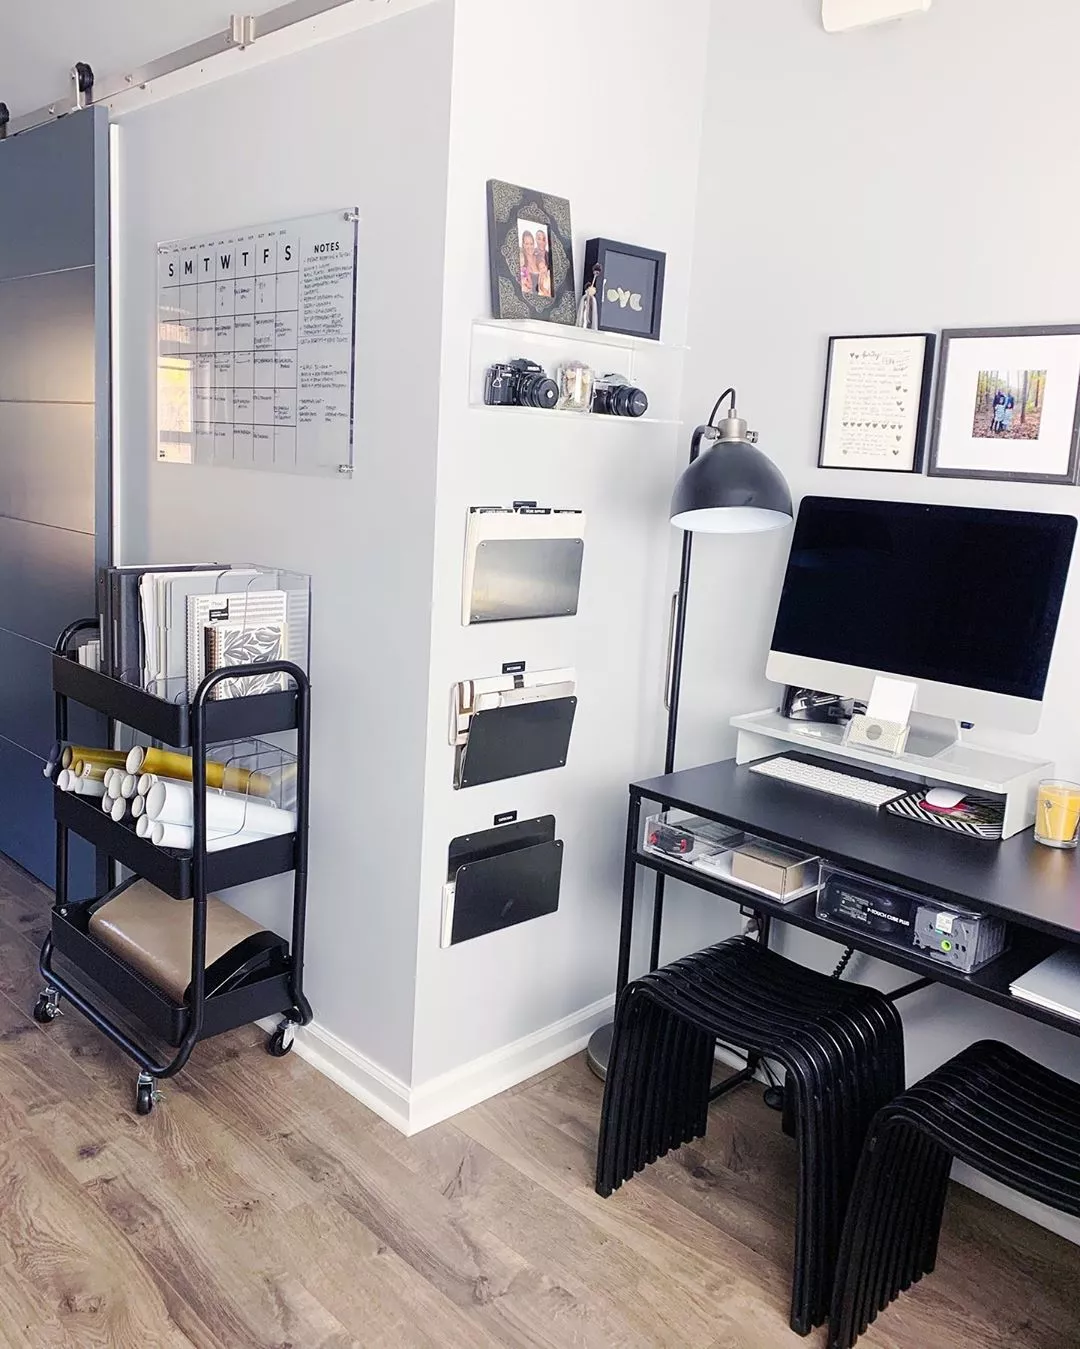 Home Office Ideas - Are you working from home more? Do you need